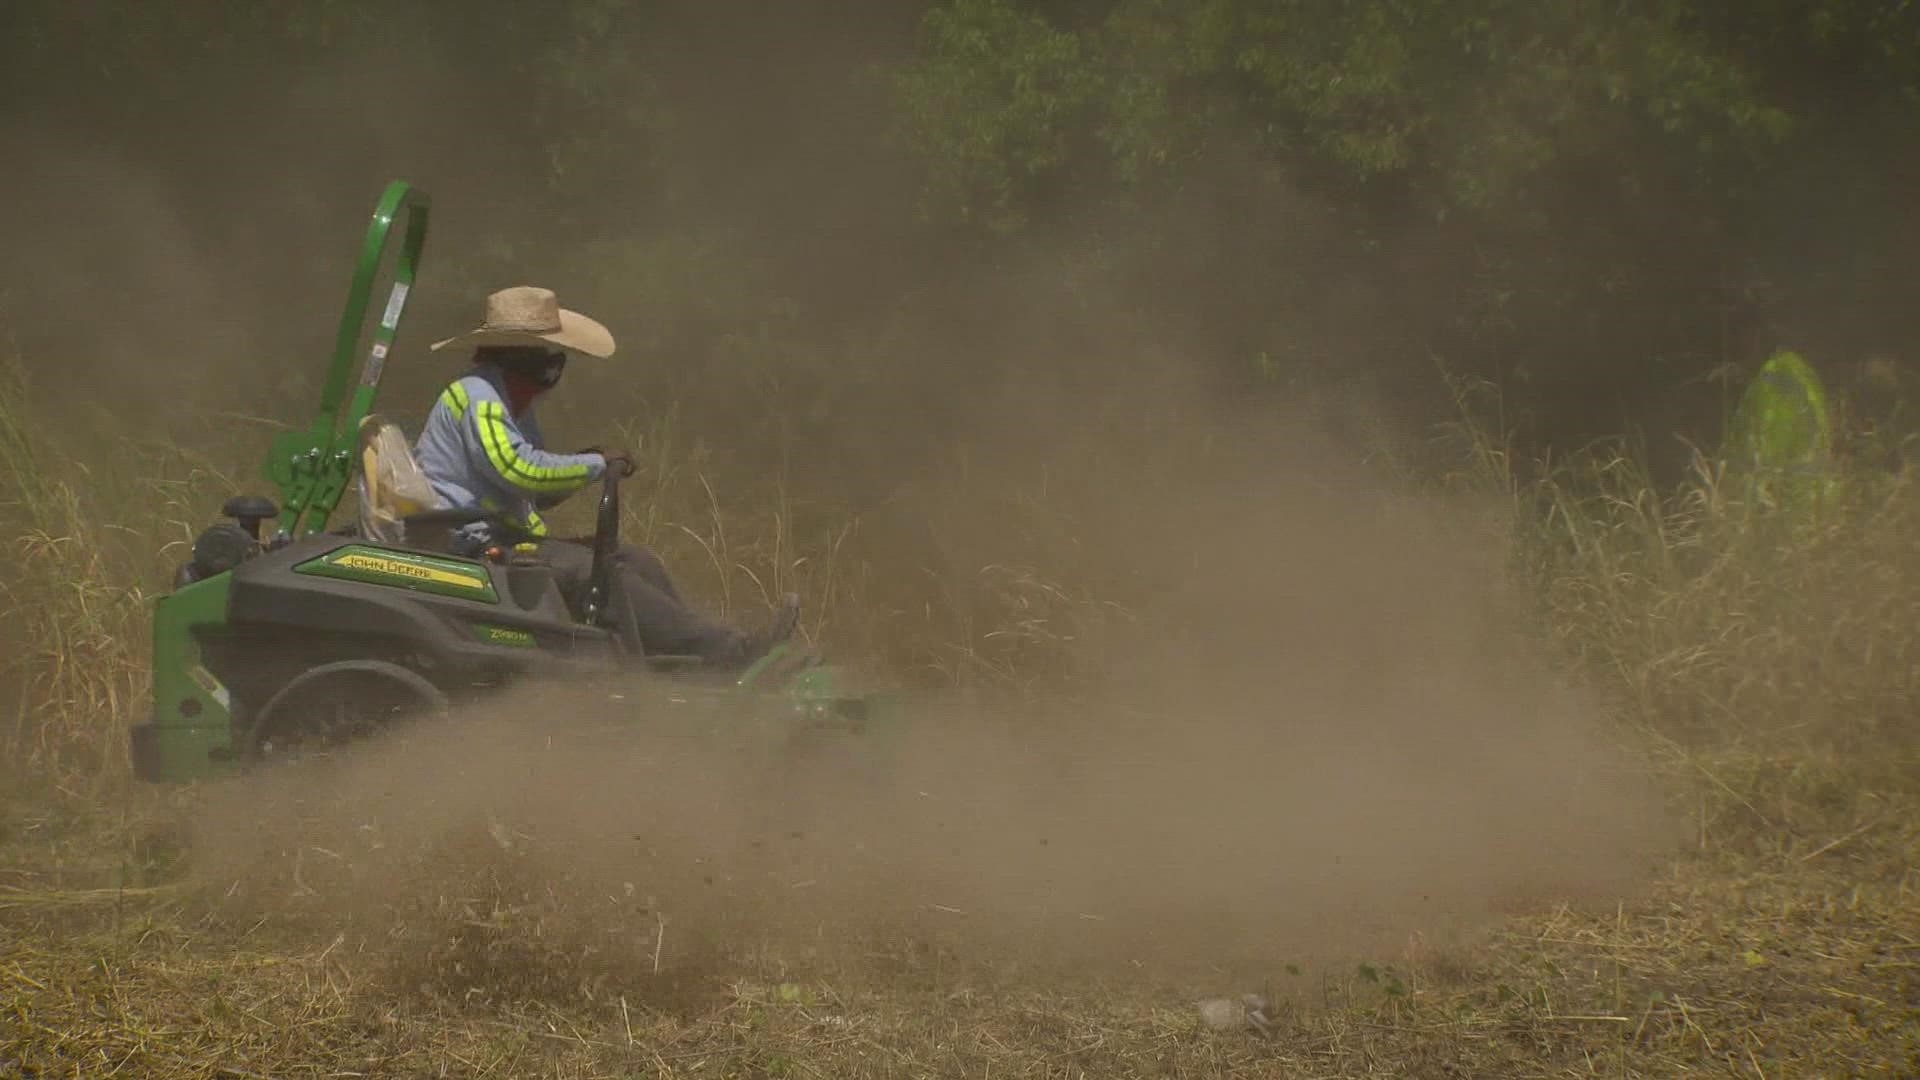 City workers mow down overgrown lots filled with weeds to lower the risk of grass fires. The city is reporting people to report any overgrown lots they see.